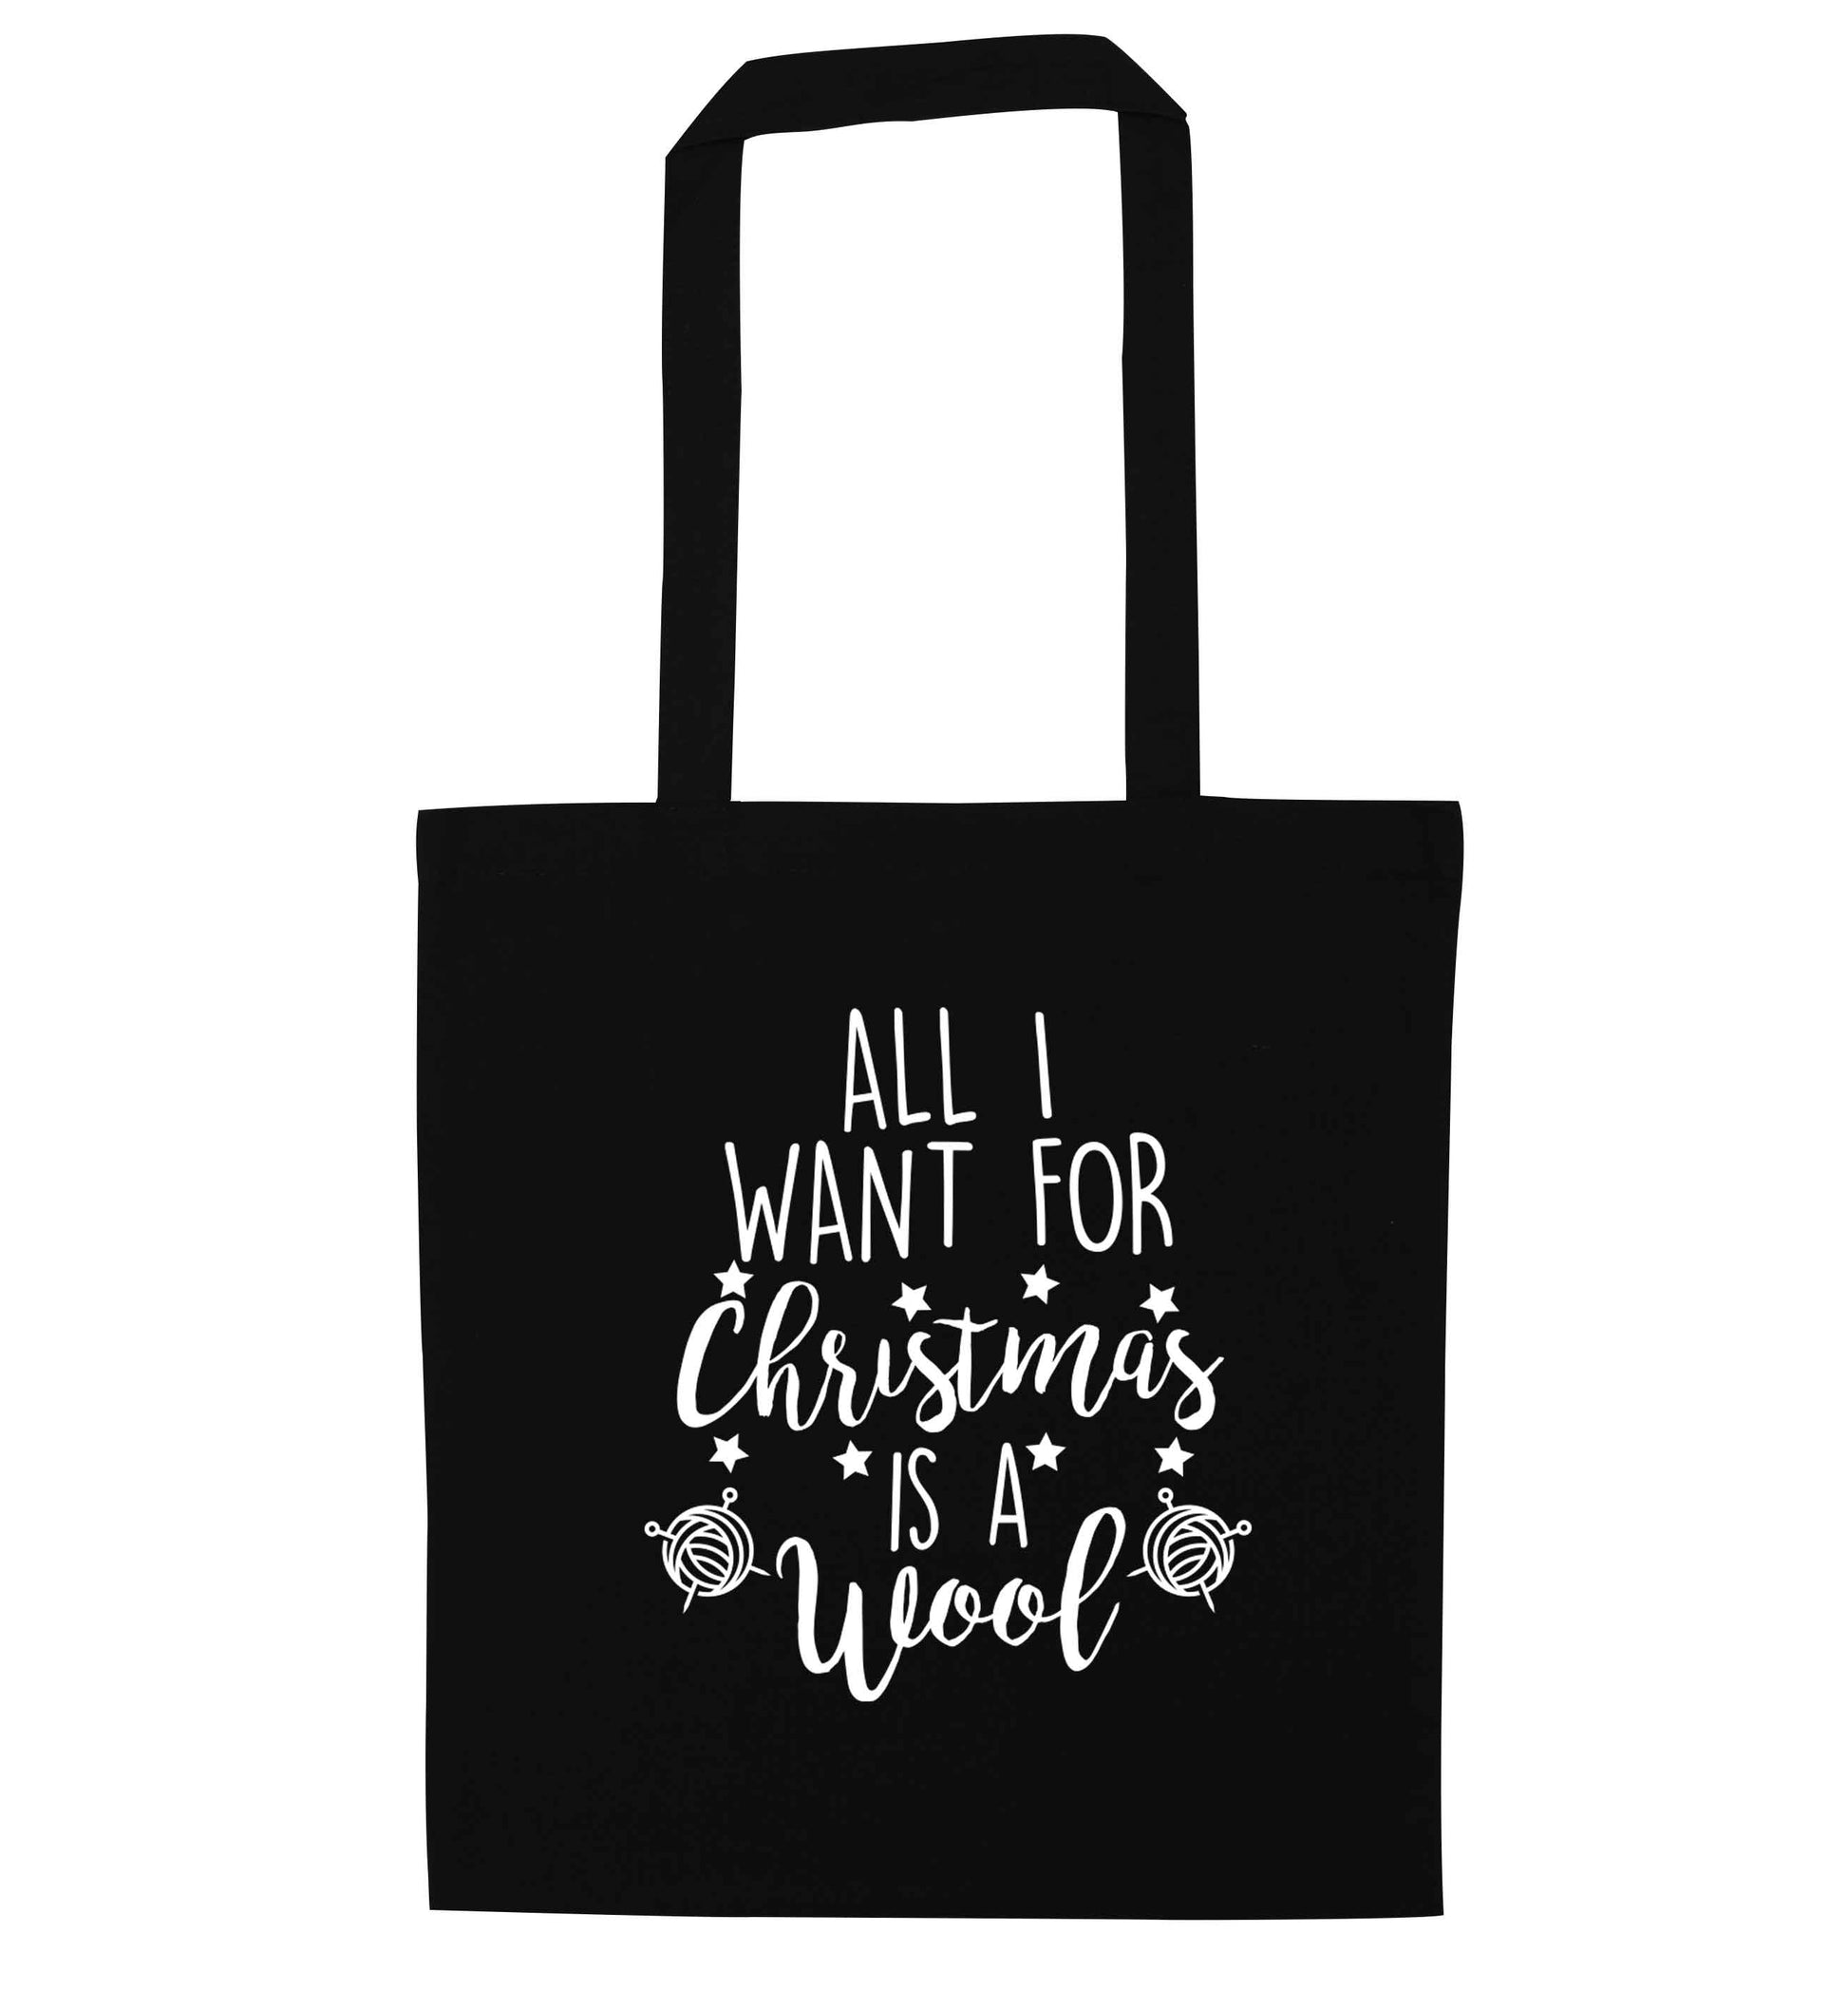 All I want for Christmas is wool! black tote bag